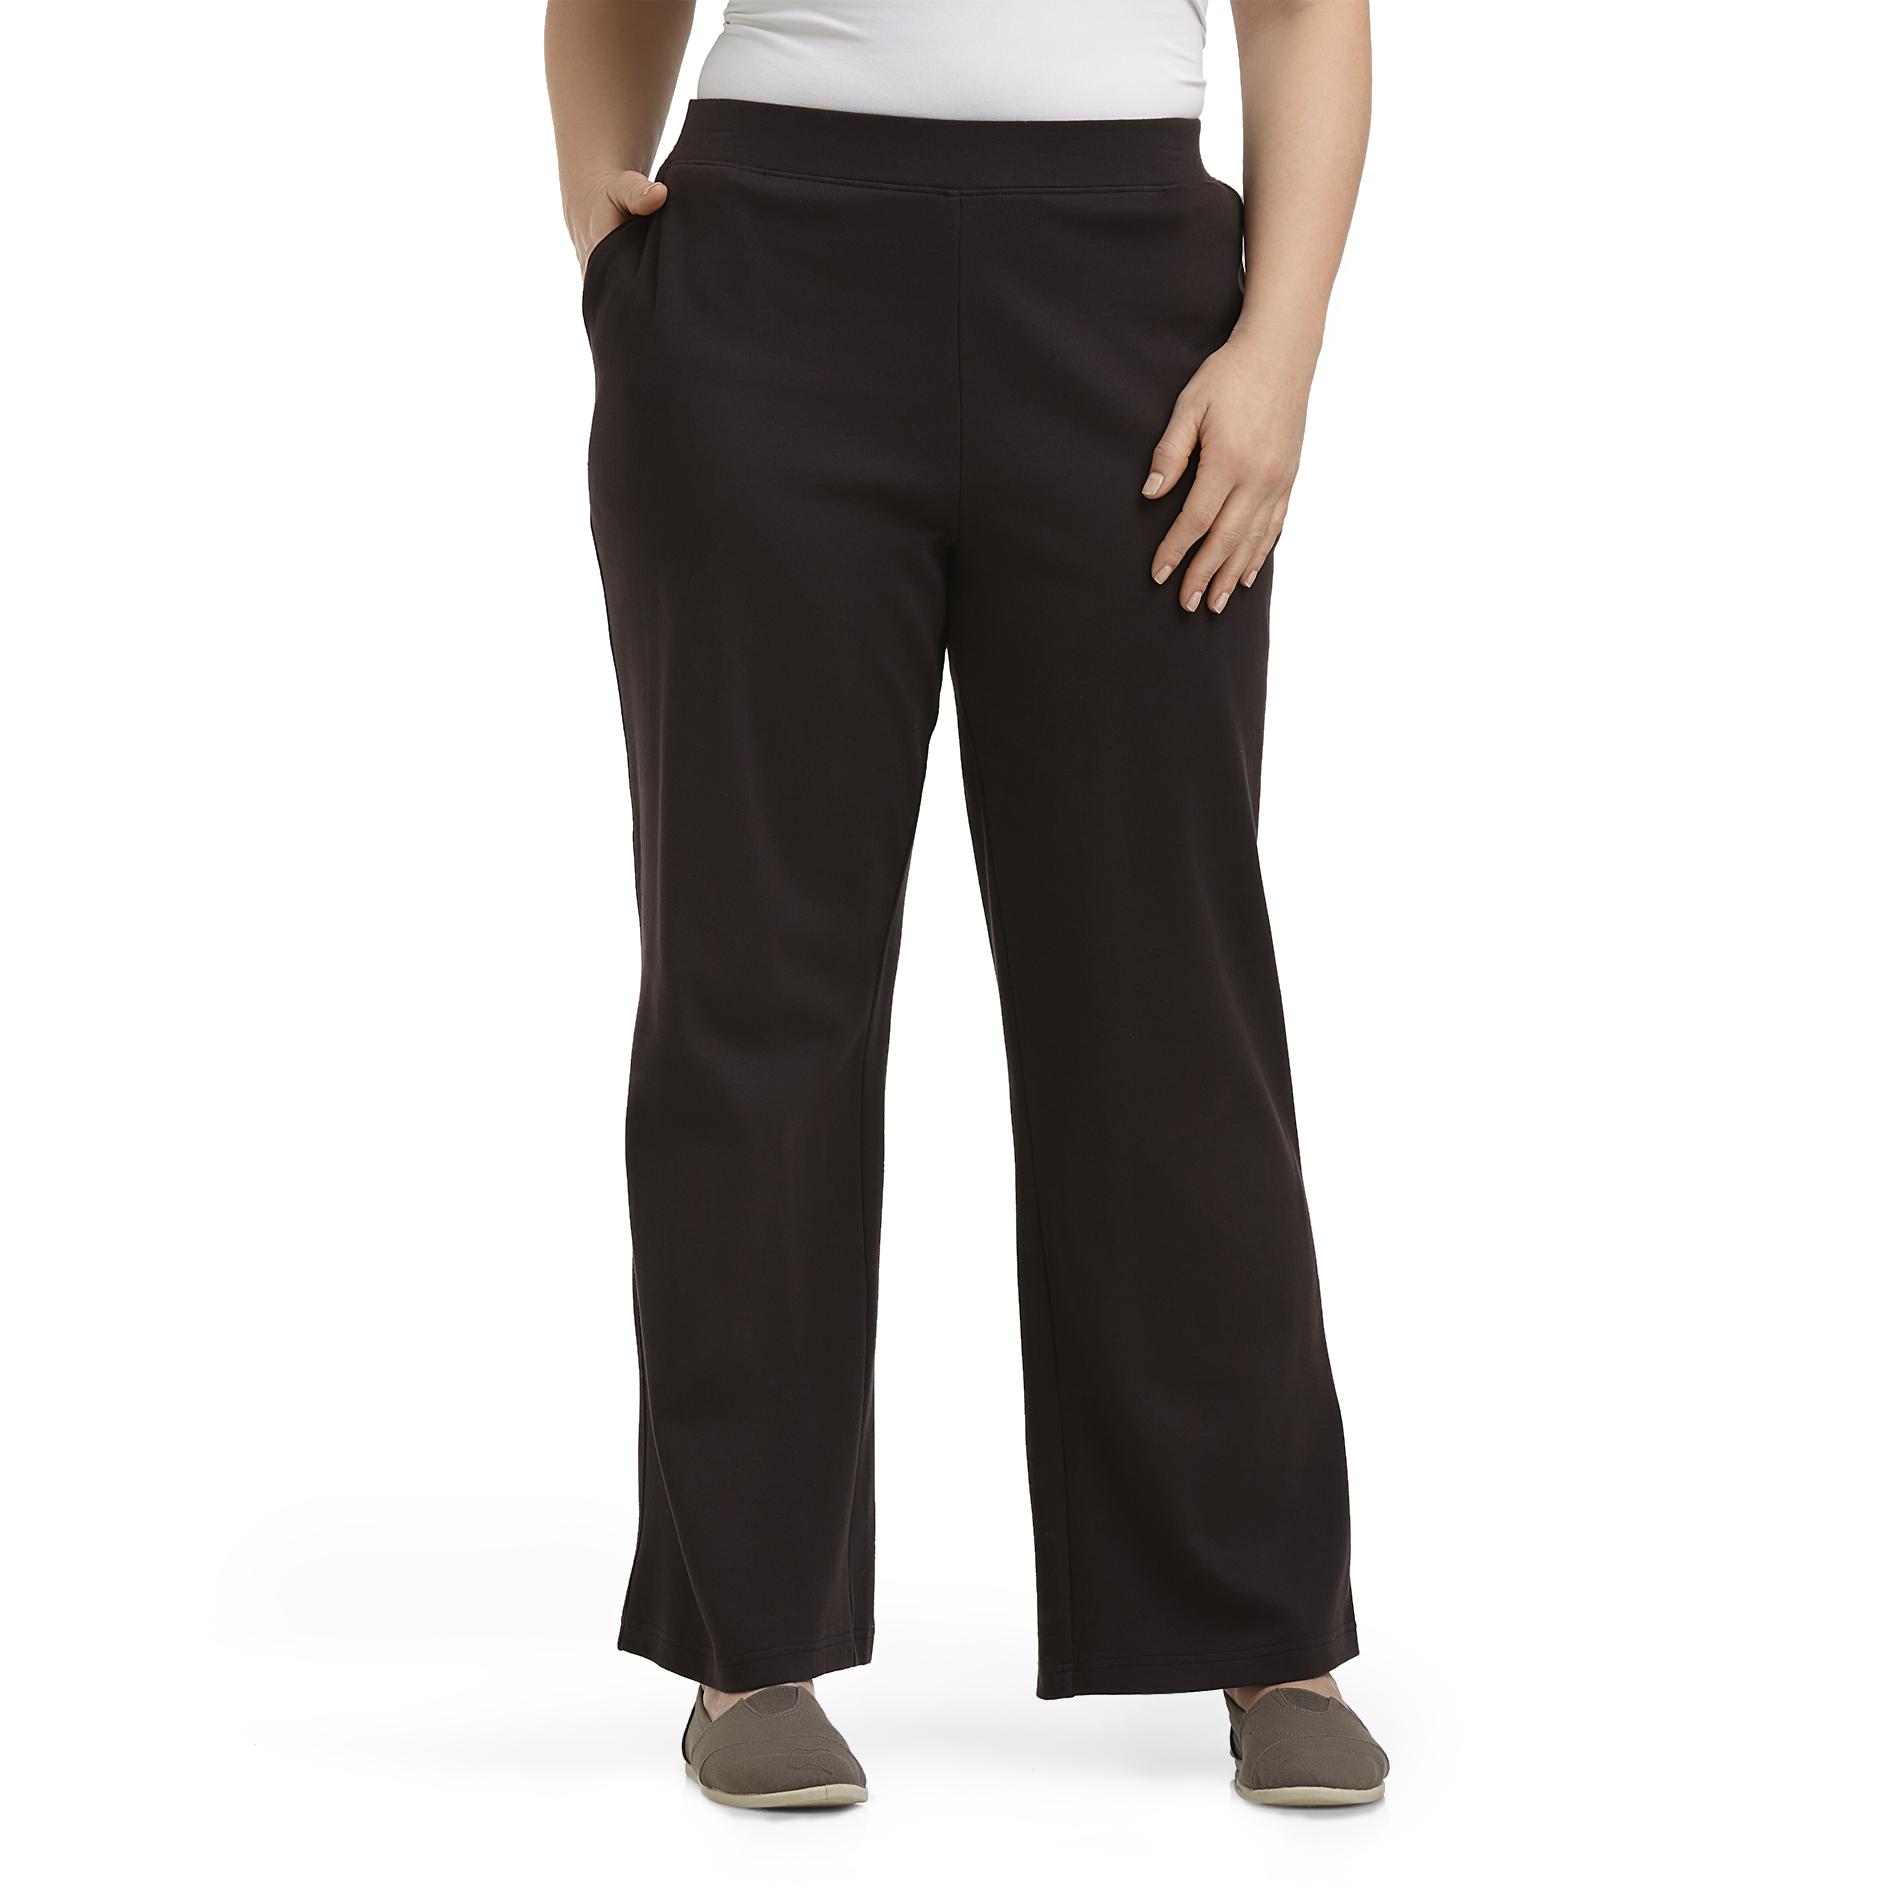 Basic Editions Women's Plus Pull-On Knit Pants